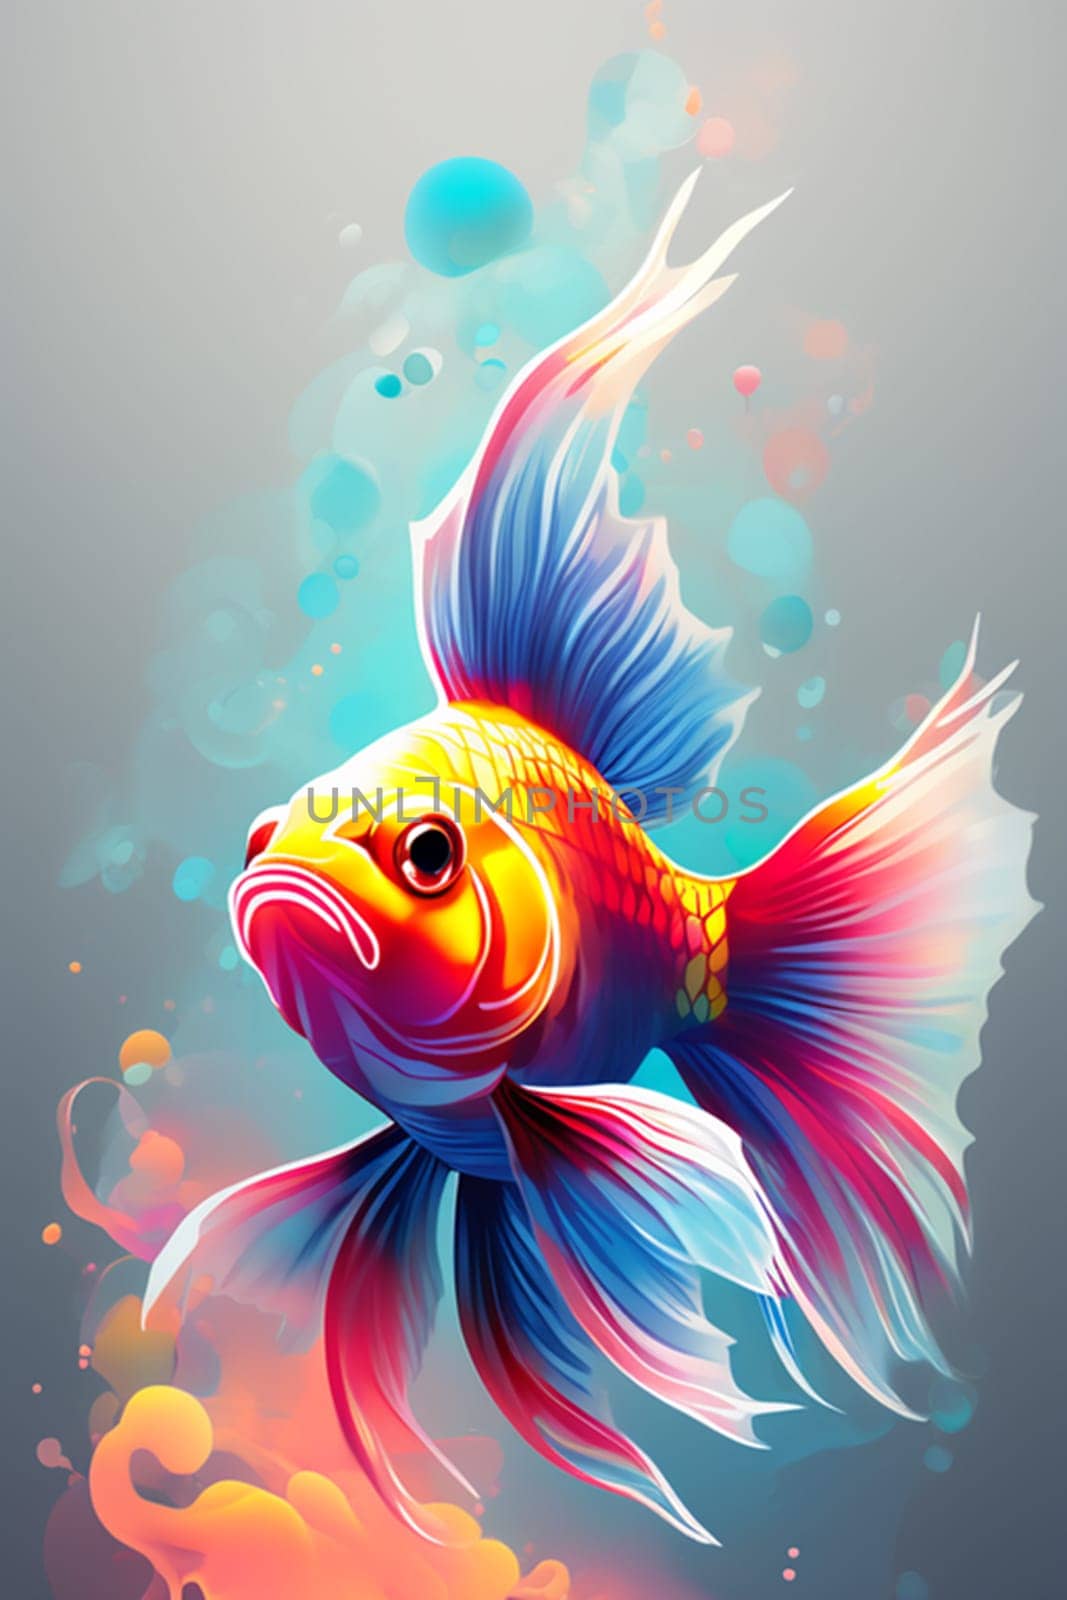 Goldfish in neon color in pop art style. Minimalist style, neon line logo, depicting a mosaic fish surrounded by vibrant smoke effects. by Ekaterina34